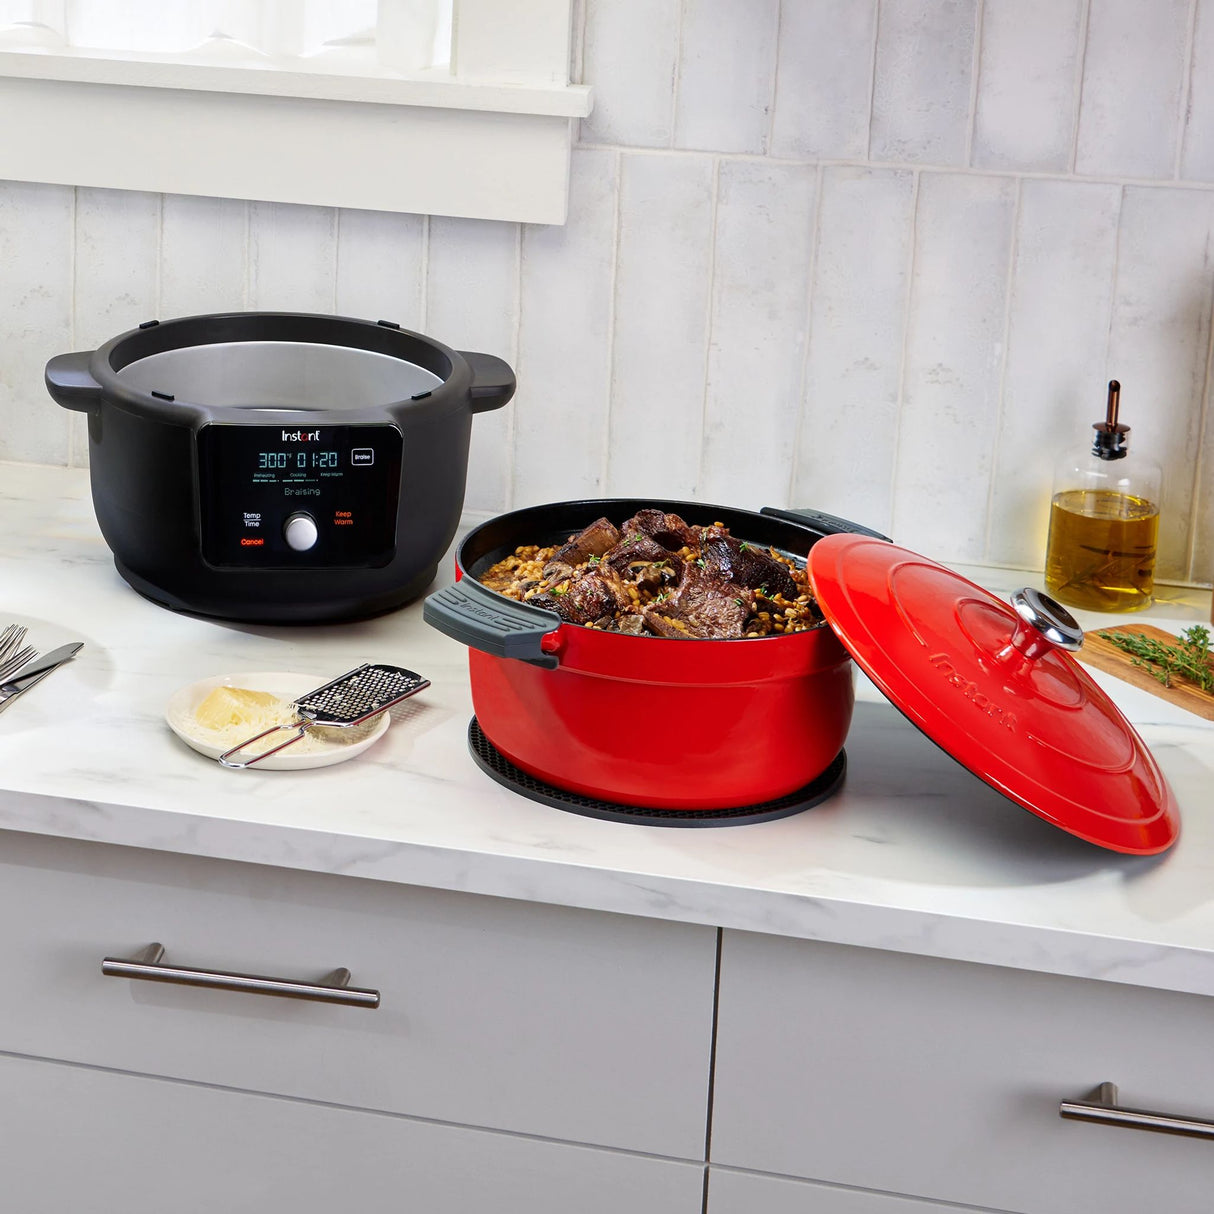  Instant Precision 6-quart Dutch Oven on the counter